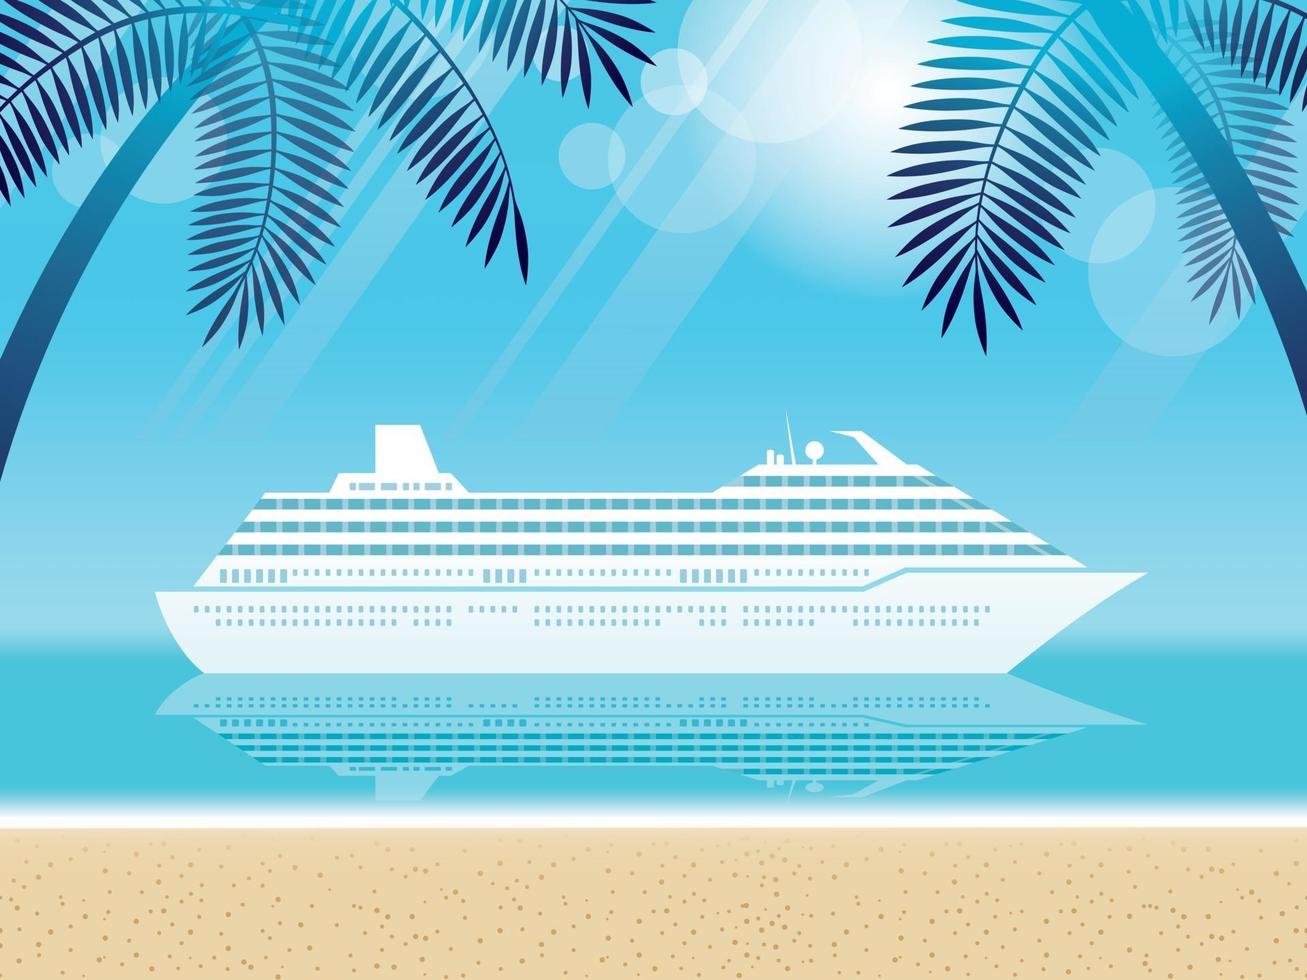 Luxury Cruise Ship And Tropical Beach With Palm Trees vector